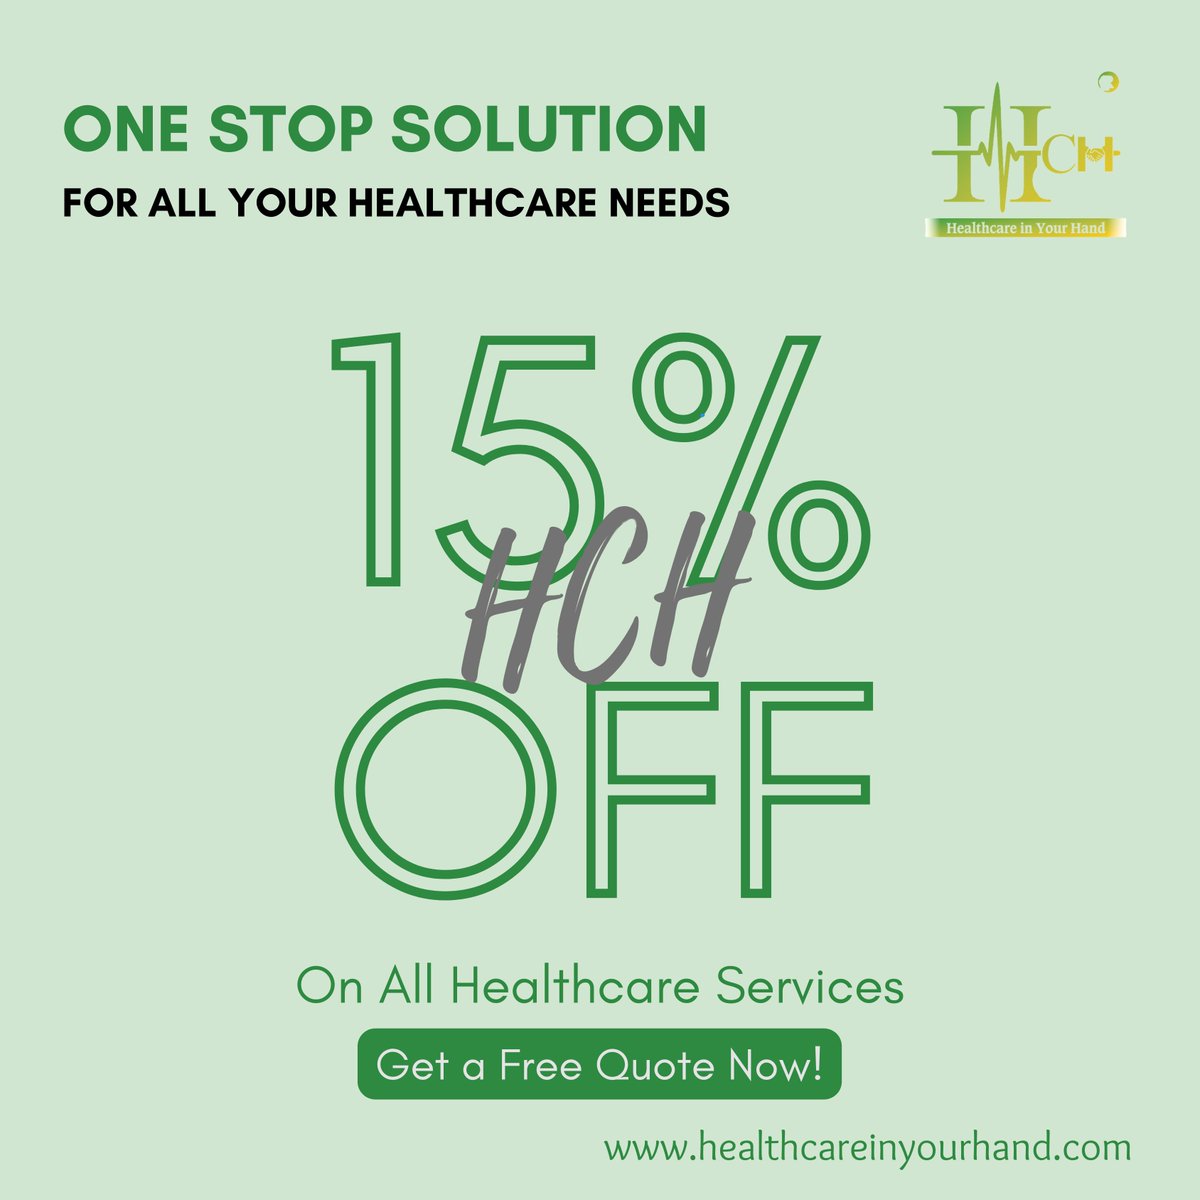 Looking for top-notch healthcare services?

#MedicalTourism #AffordableHealthcare #GlobalHealthcare #QualityTreatment #HealthcareInHand #MedicalTravel #ExpertCare #medicaltourism #healthtrip #sudan #thisissouthafrica #arabicdoctors #arabicpeople #arabichealth #iraq #iraq